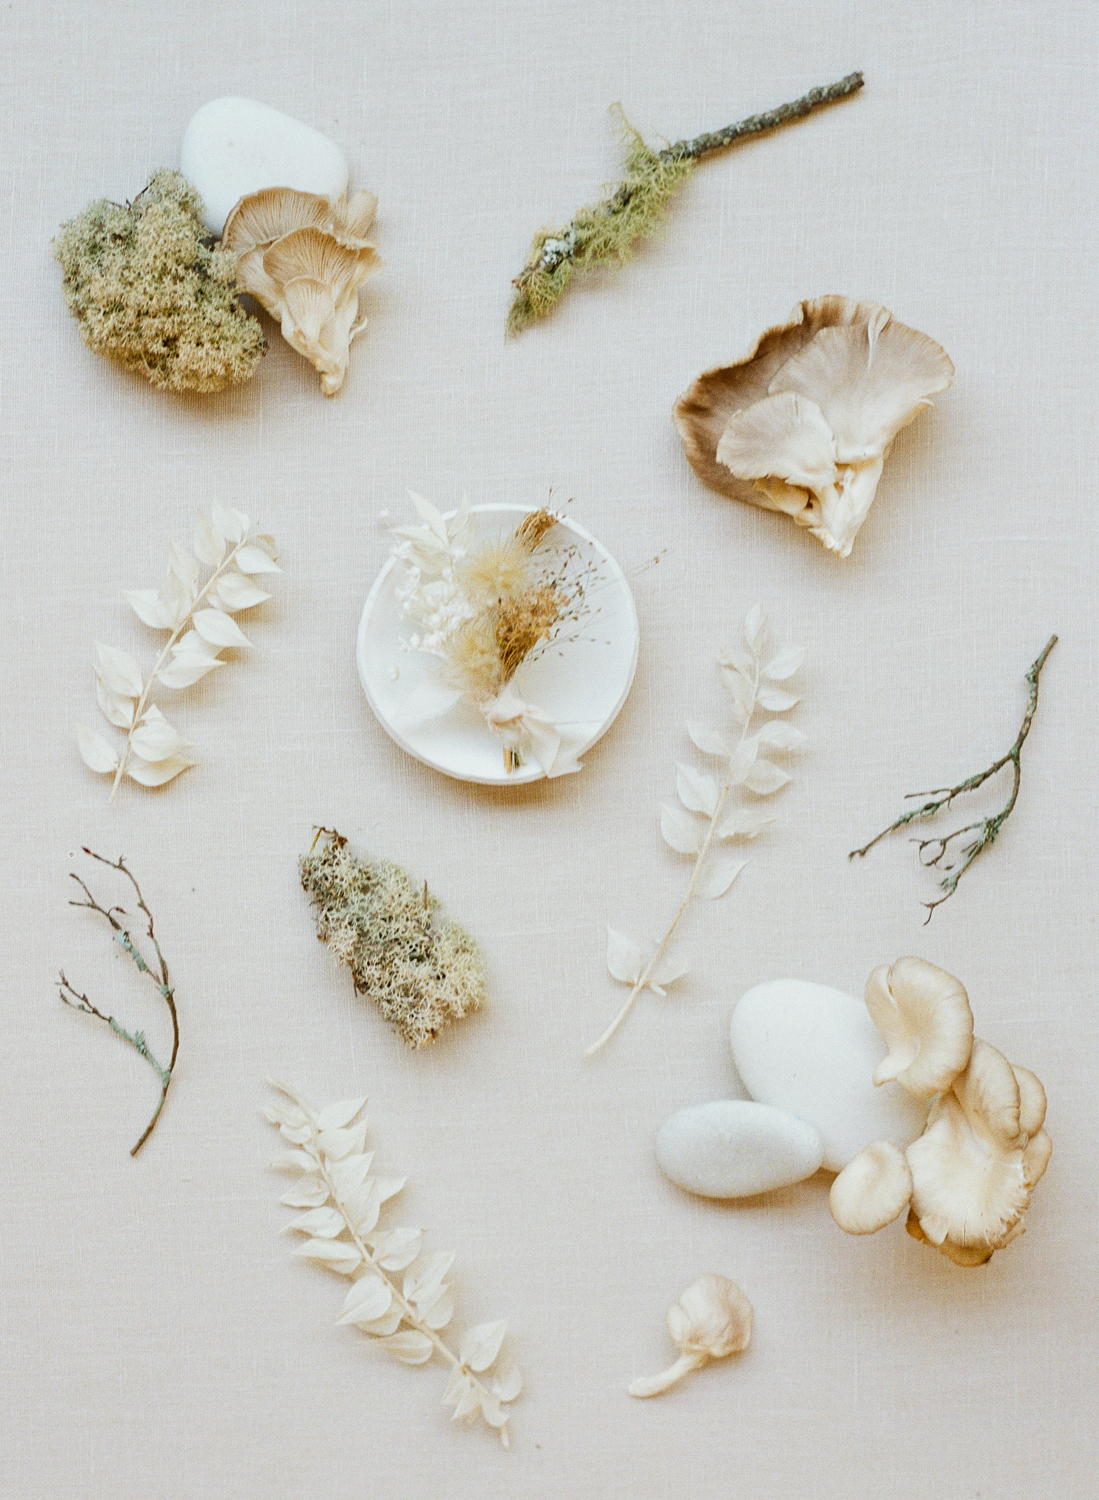 Dried floral boutonierre